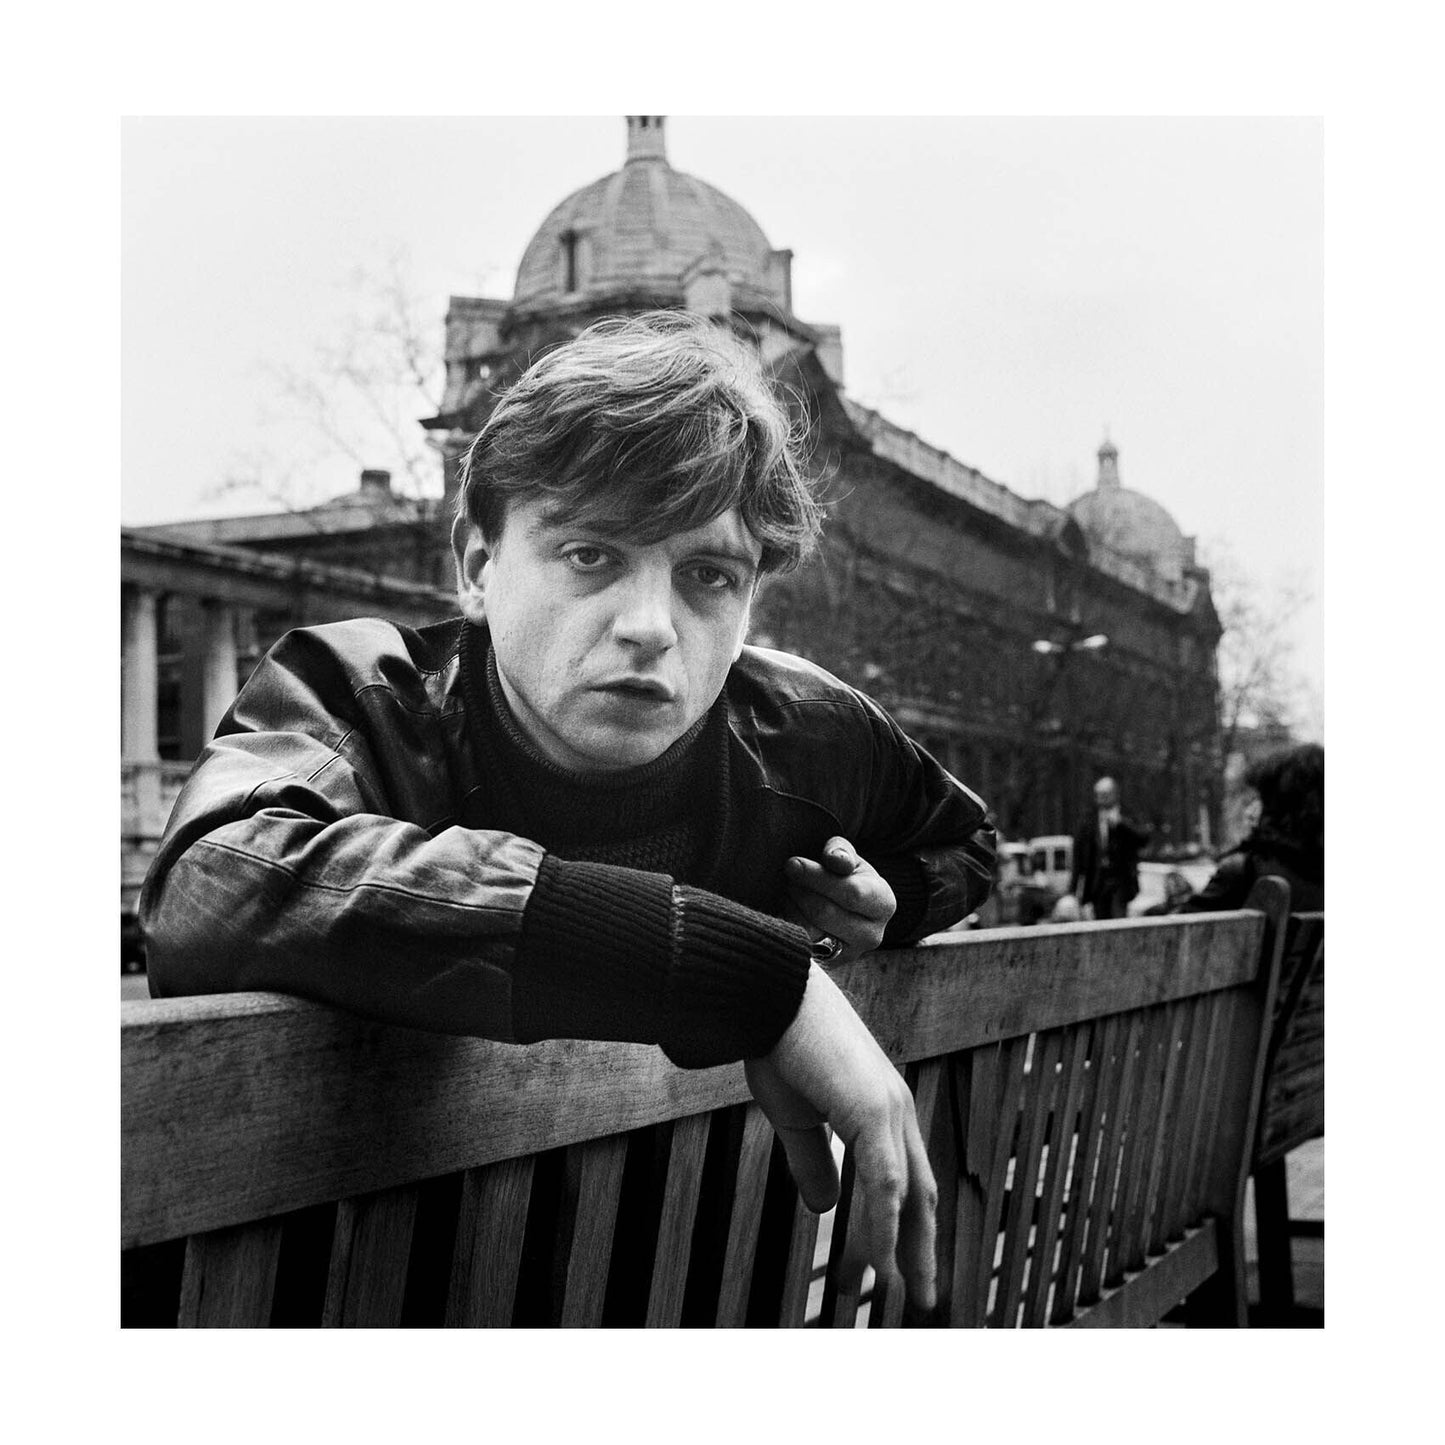 The Fall - Mark E. Smith's Black and White Portrait Sitting on a Bench, England, 1990 Print